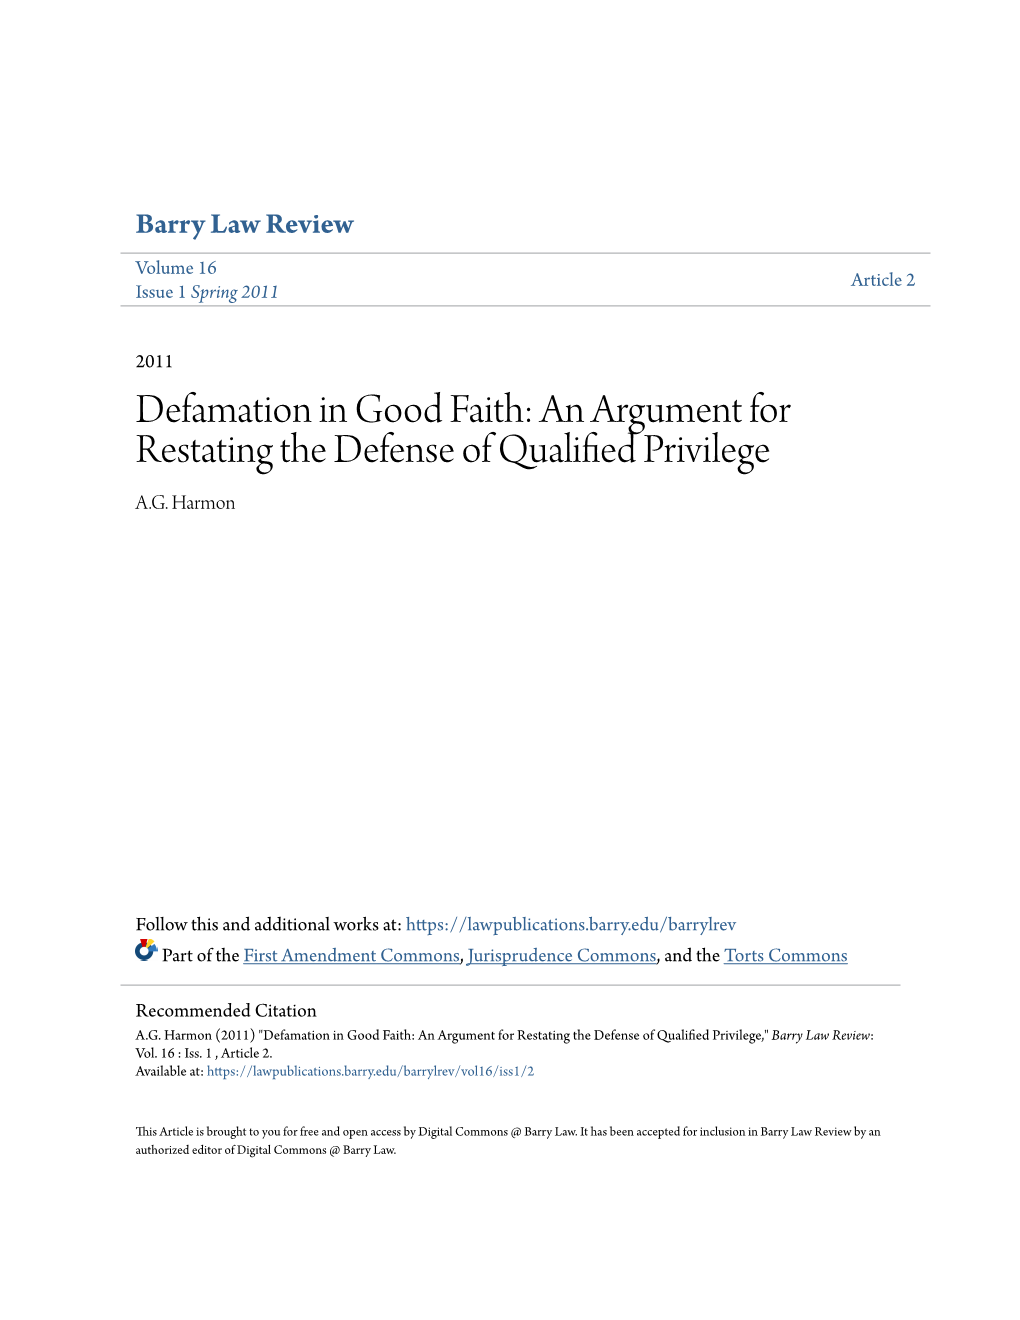 Defamation in Good Faith: an Argument for Restating the Defense of Qualified Rp Ivilege A.G